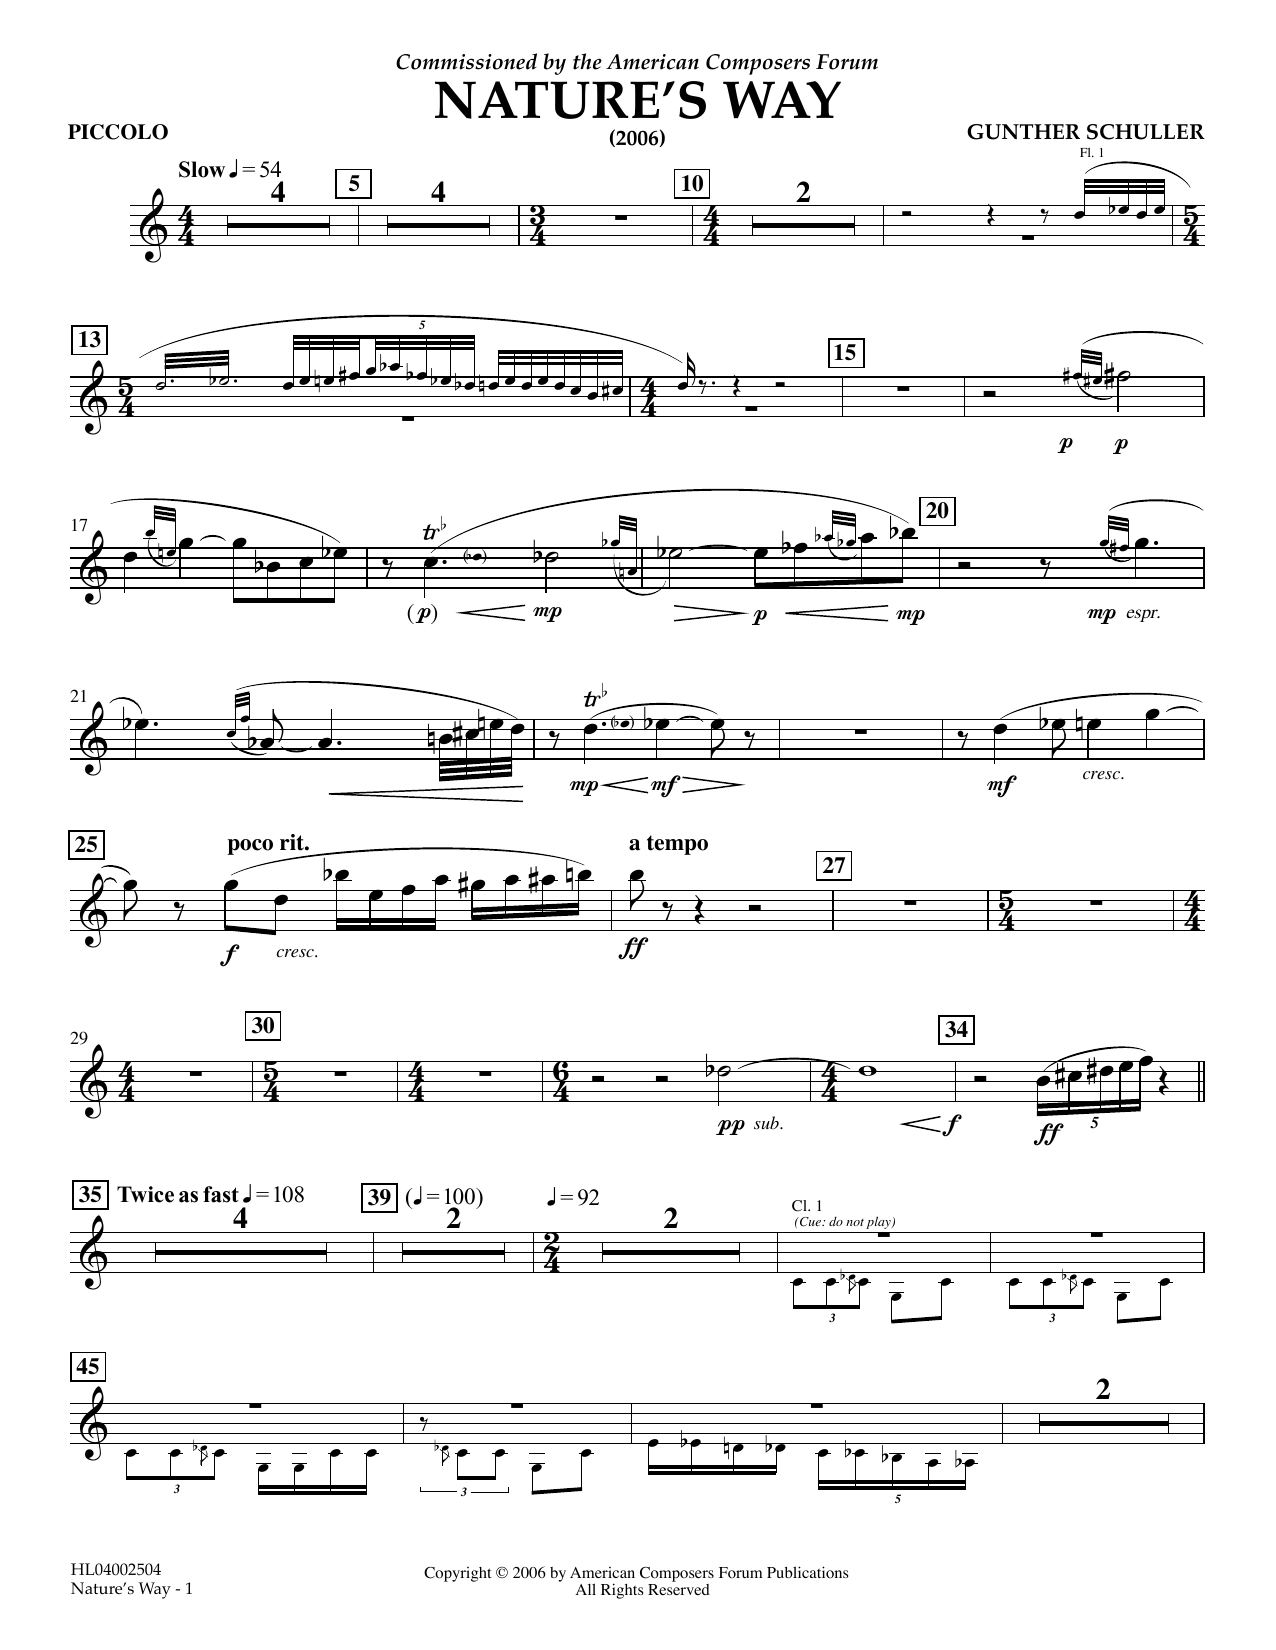 Download Gunther Schuller Nature's Way - Piccolo Sheet Music